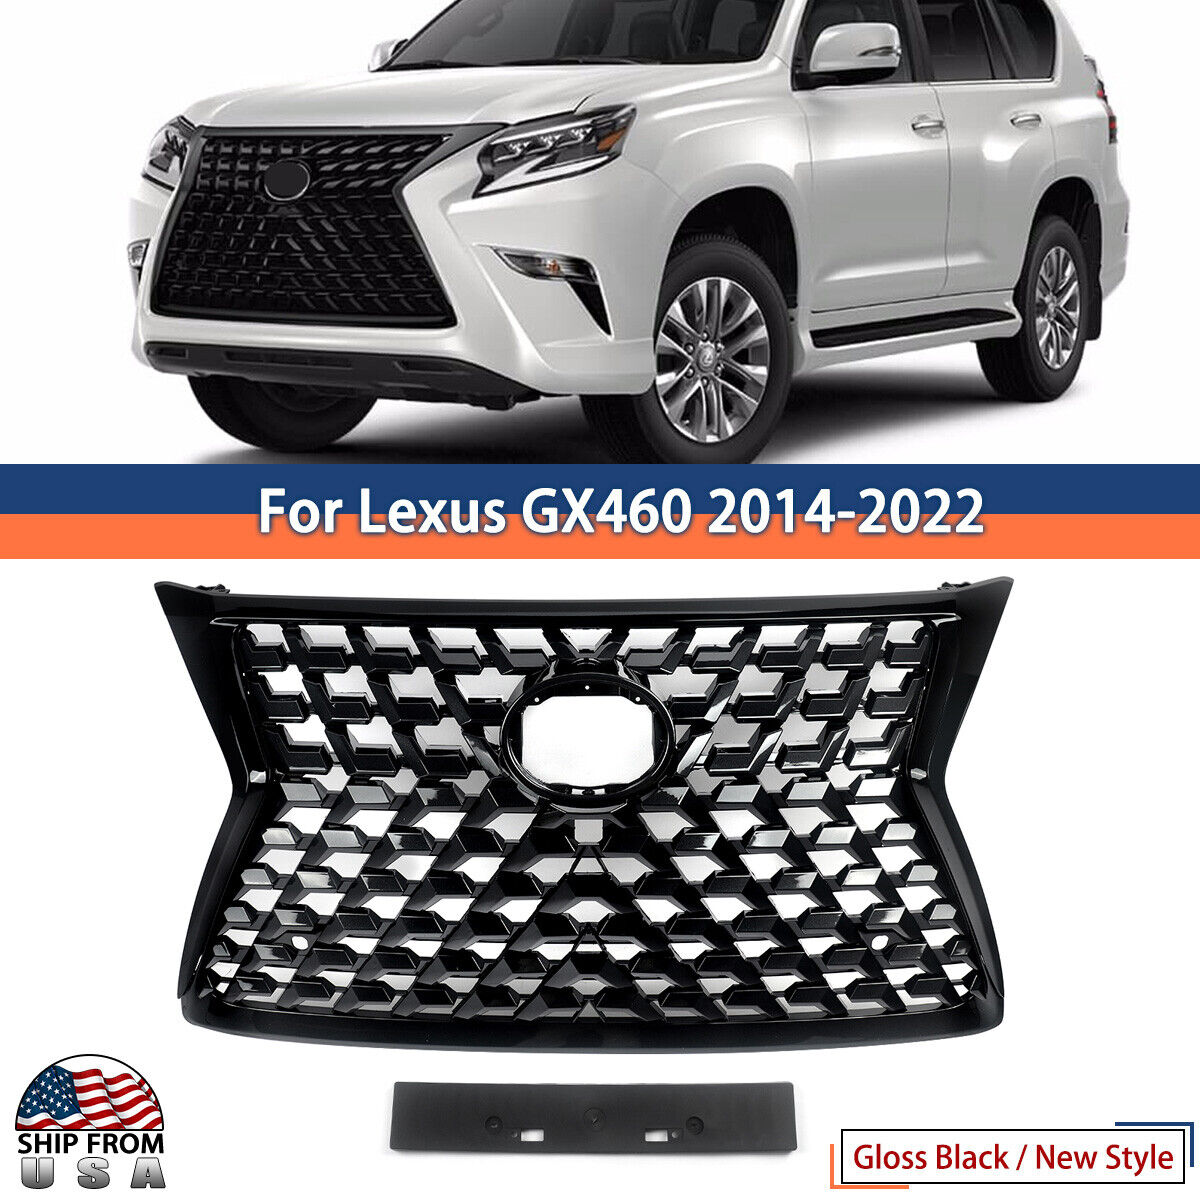 New Upgrade Luxury Gloss Black Front Grill For 2014-22 LEXUS GX460 Factory Style